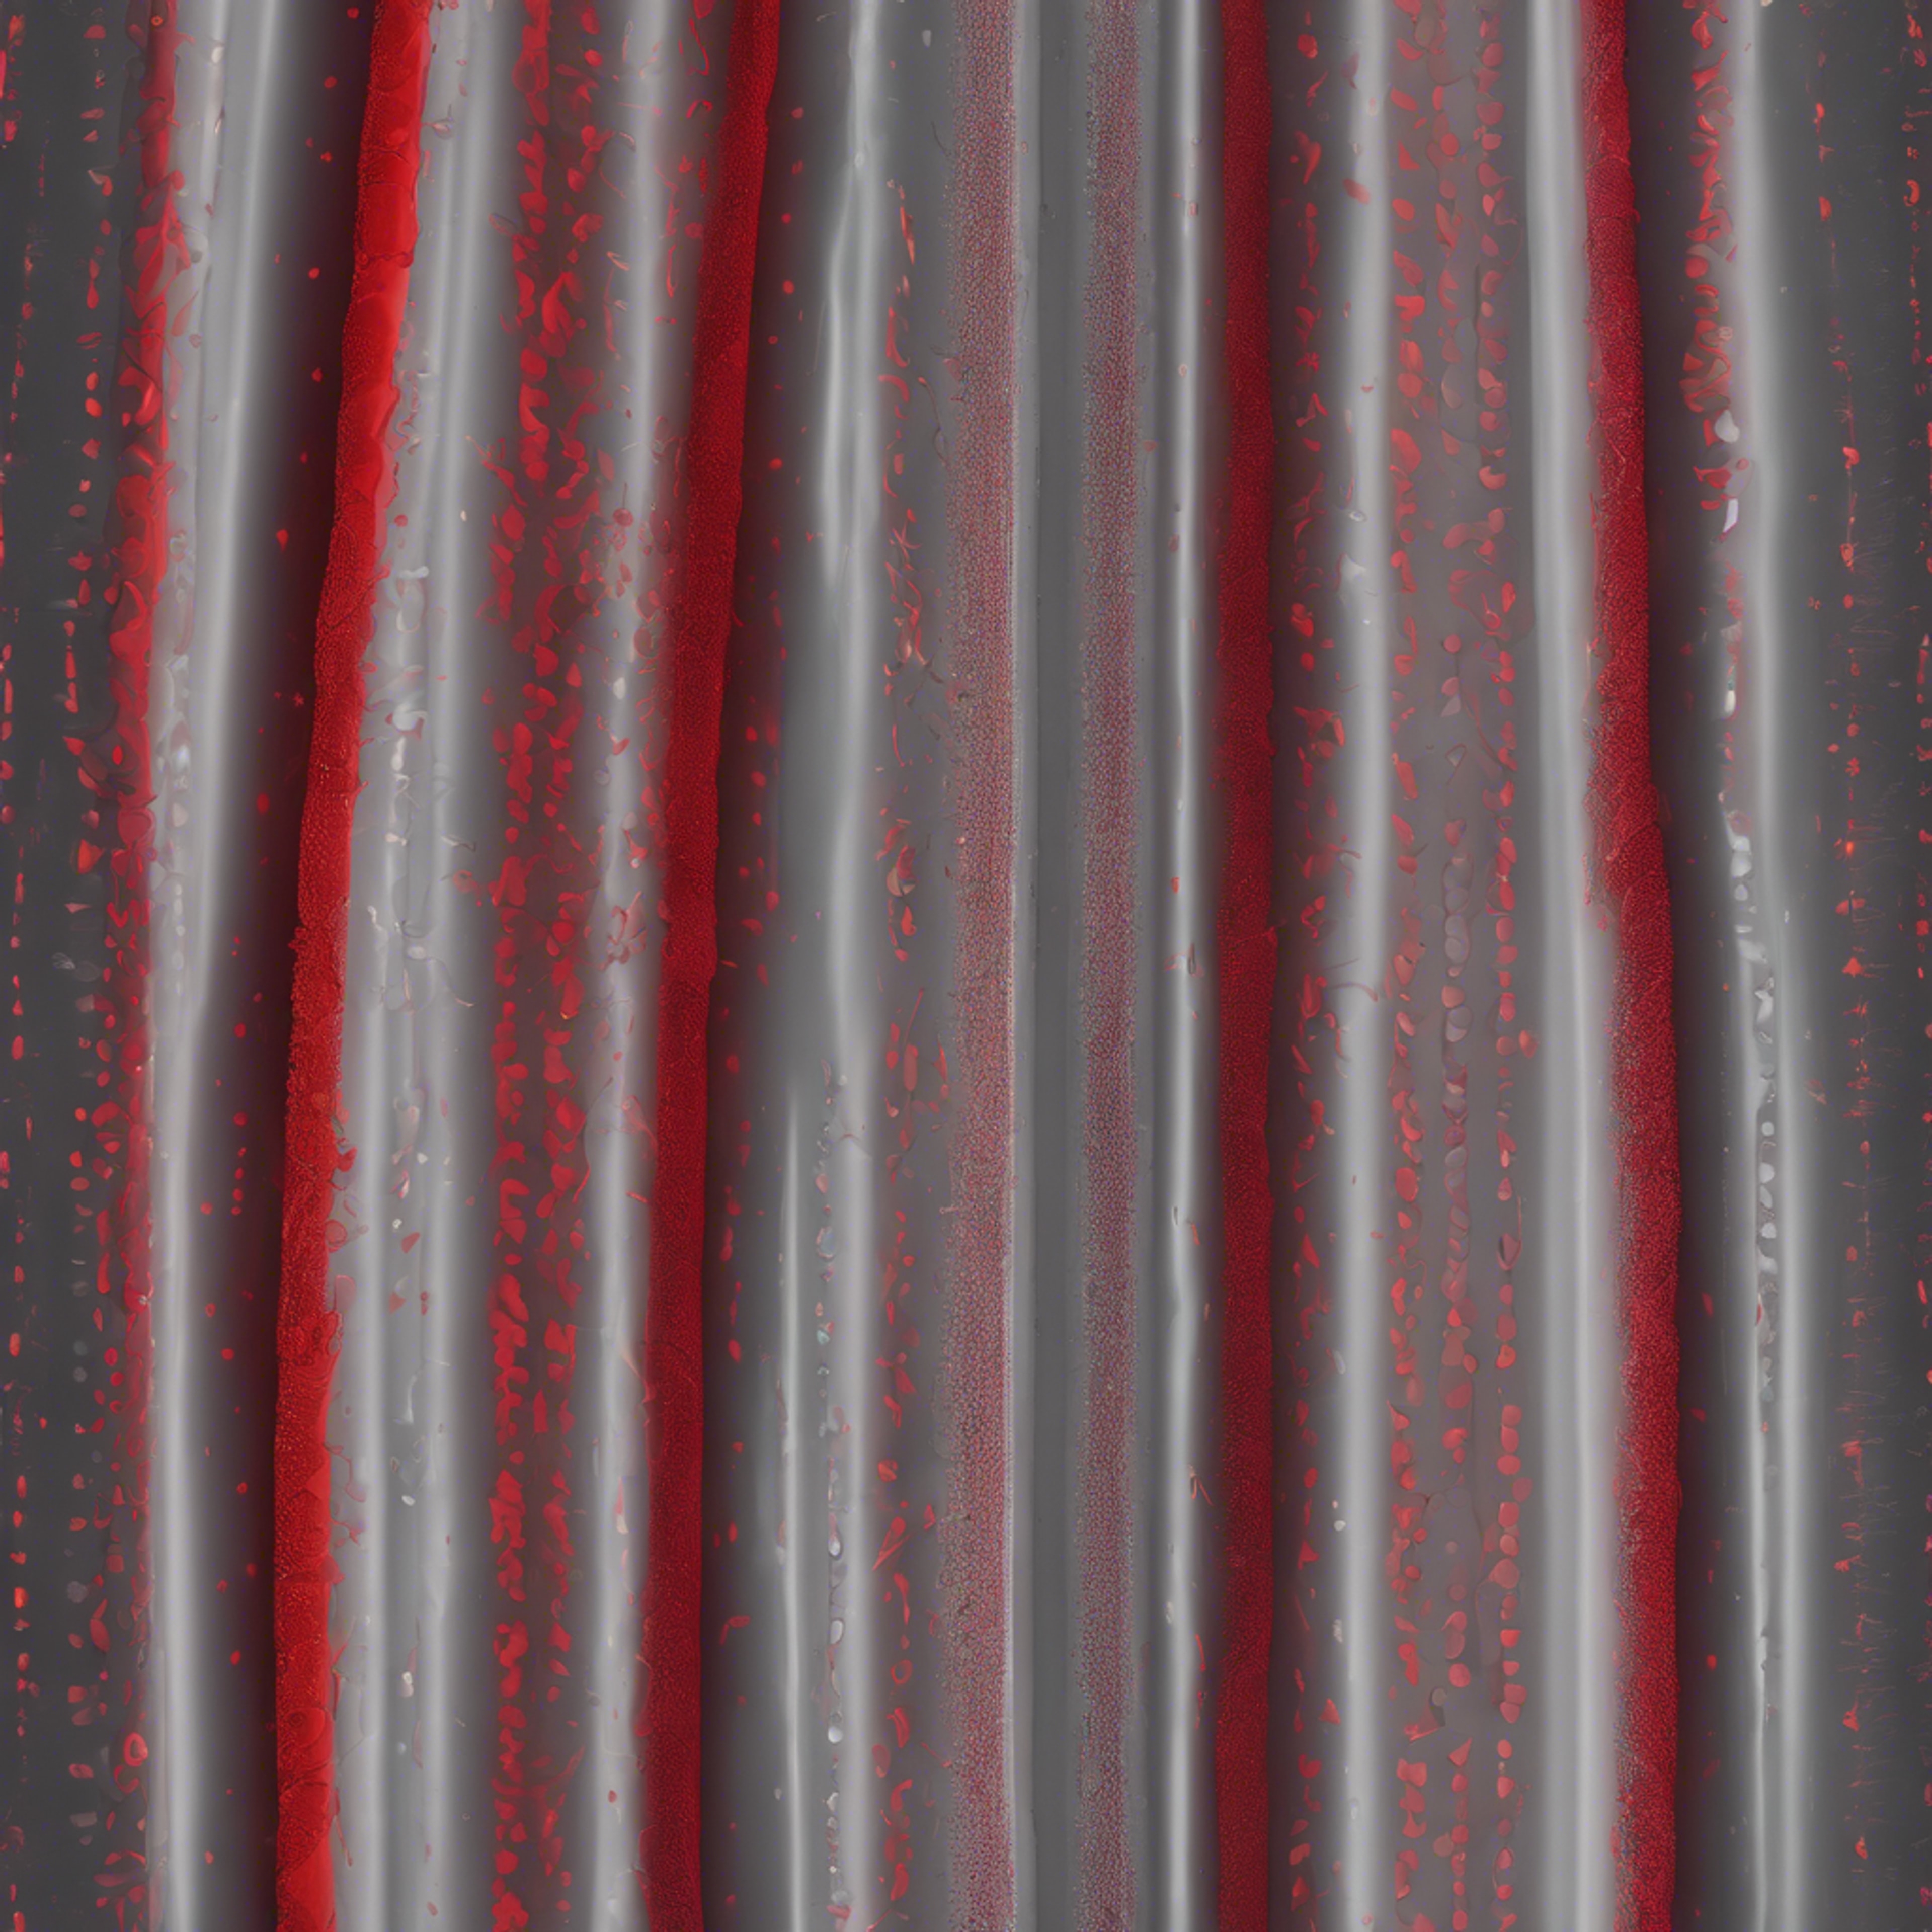 An abstract pattern with hallucinogenic red and grey gradients blending into each other. Шпалери[5c97b162f4f748b39a07]